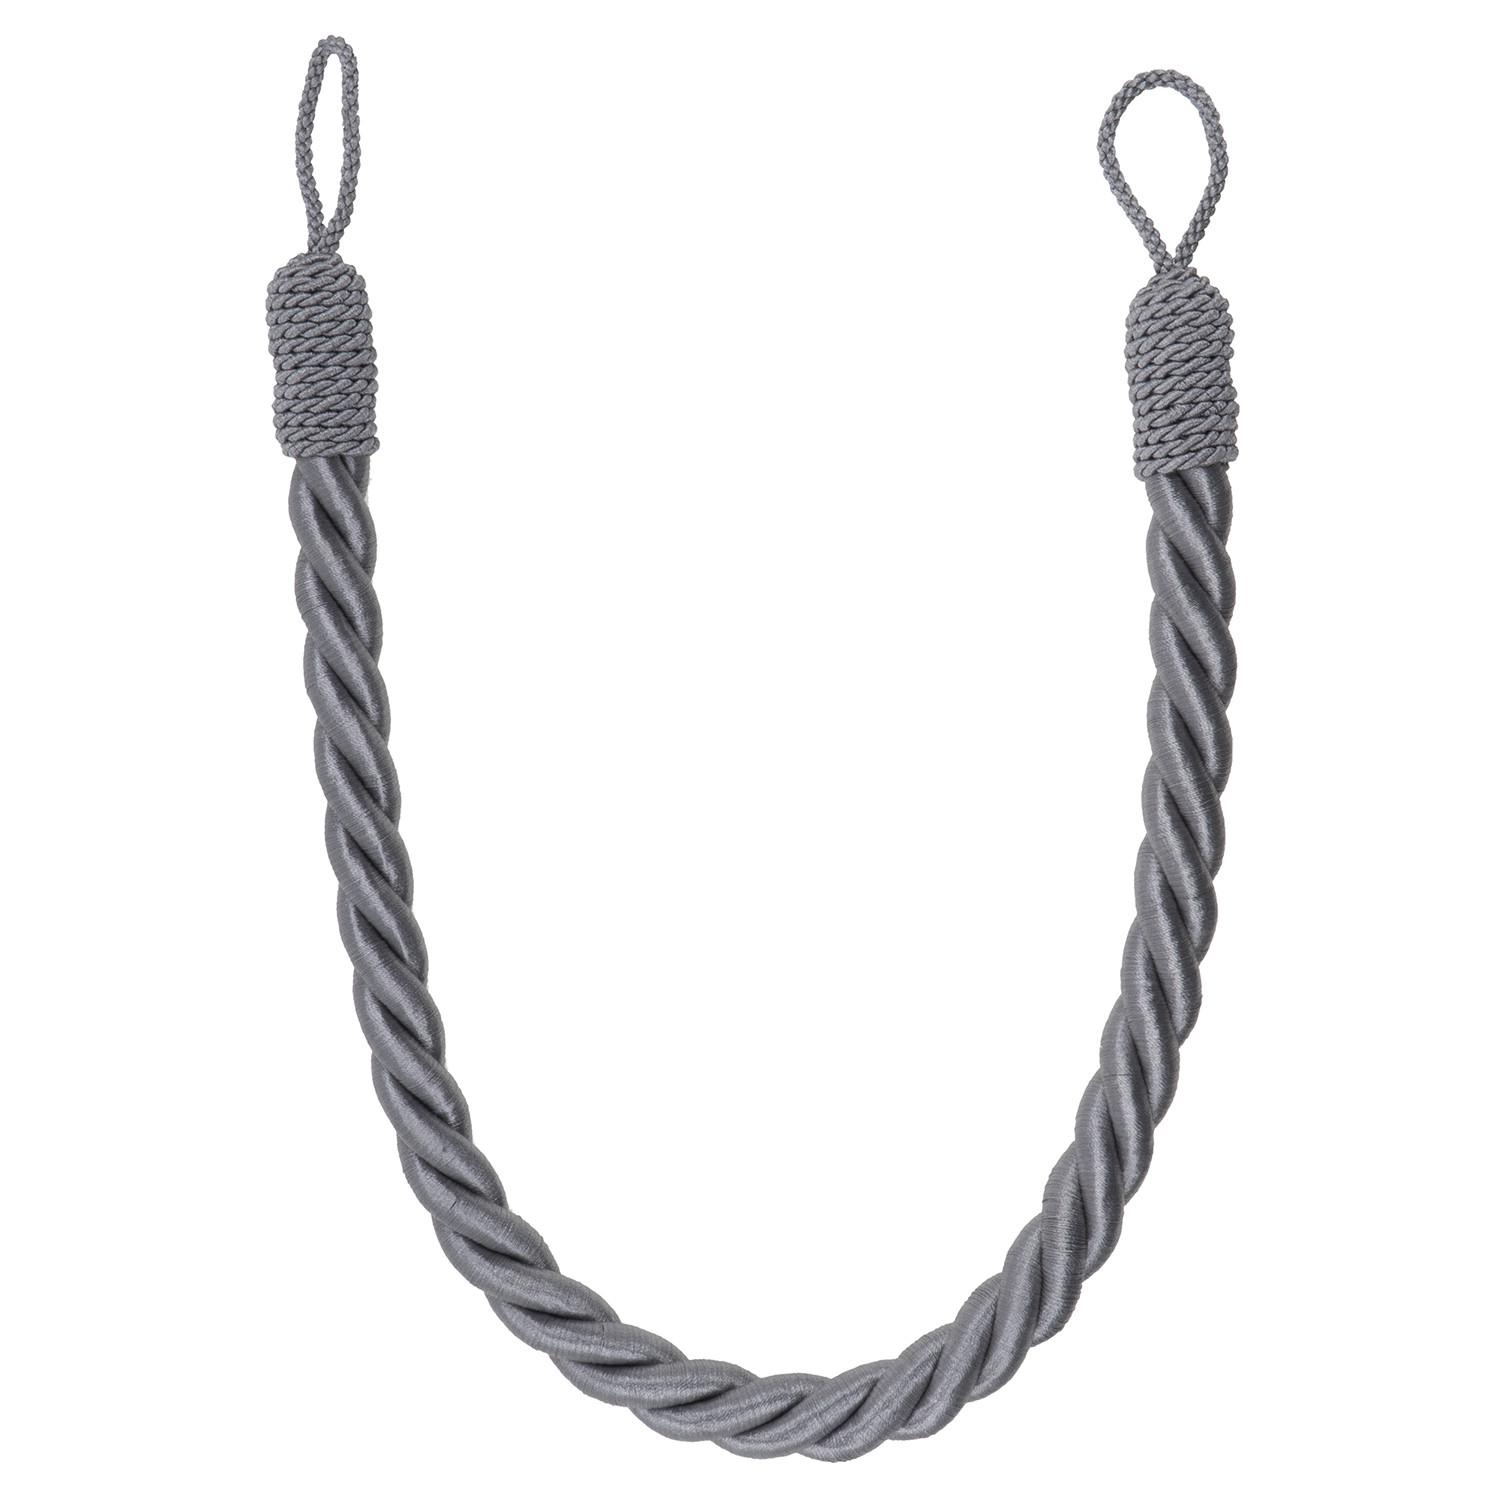 Dove Grey Reef Rope Curtain Tie Back Image 2